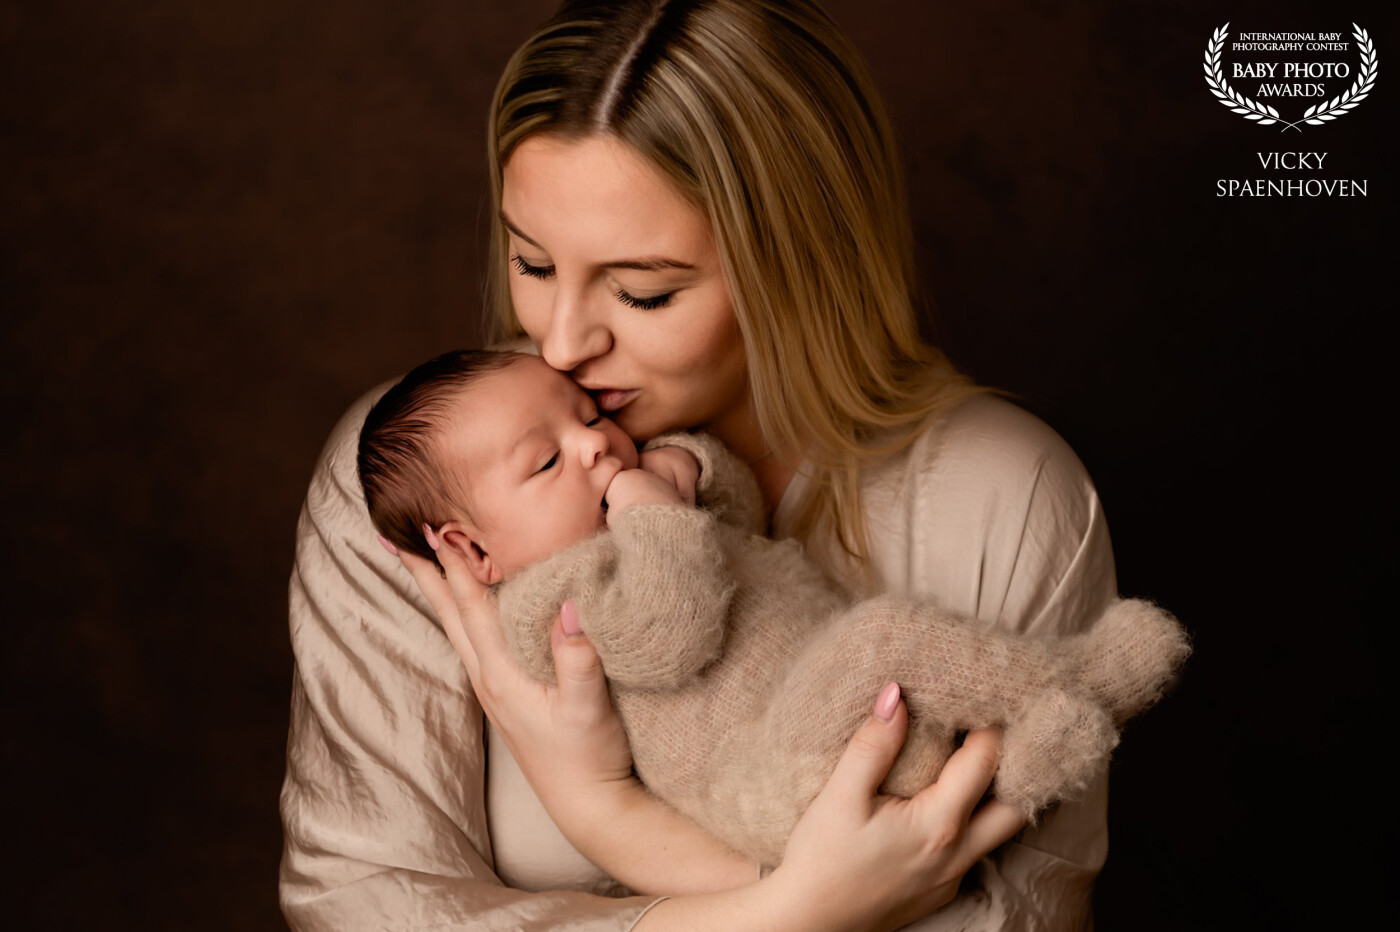 A mother’s love is so pure and powerful. It’s so special to capture these first precious moments with your child.